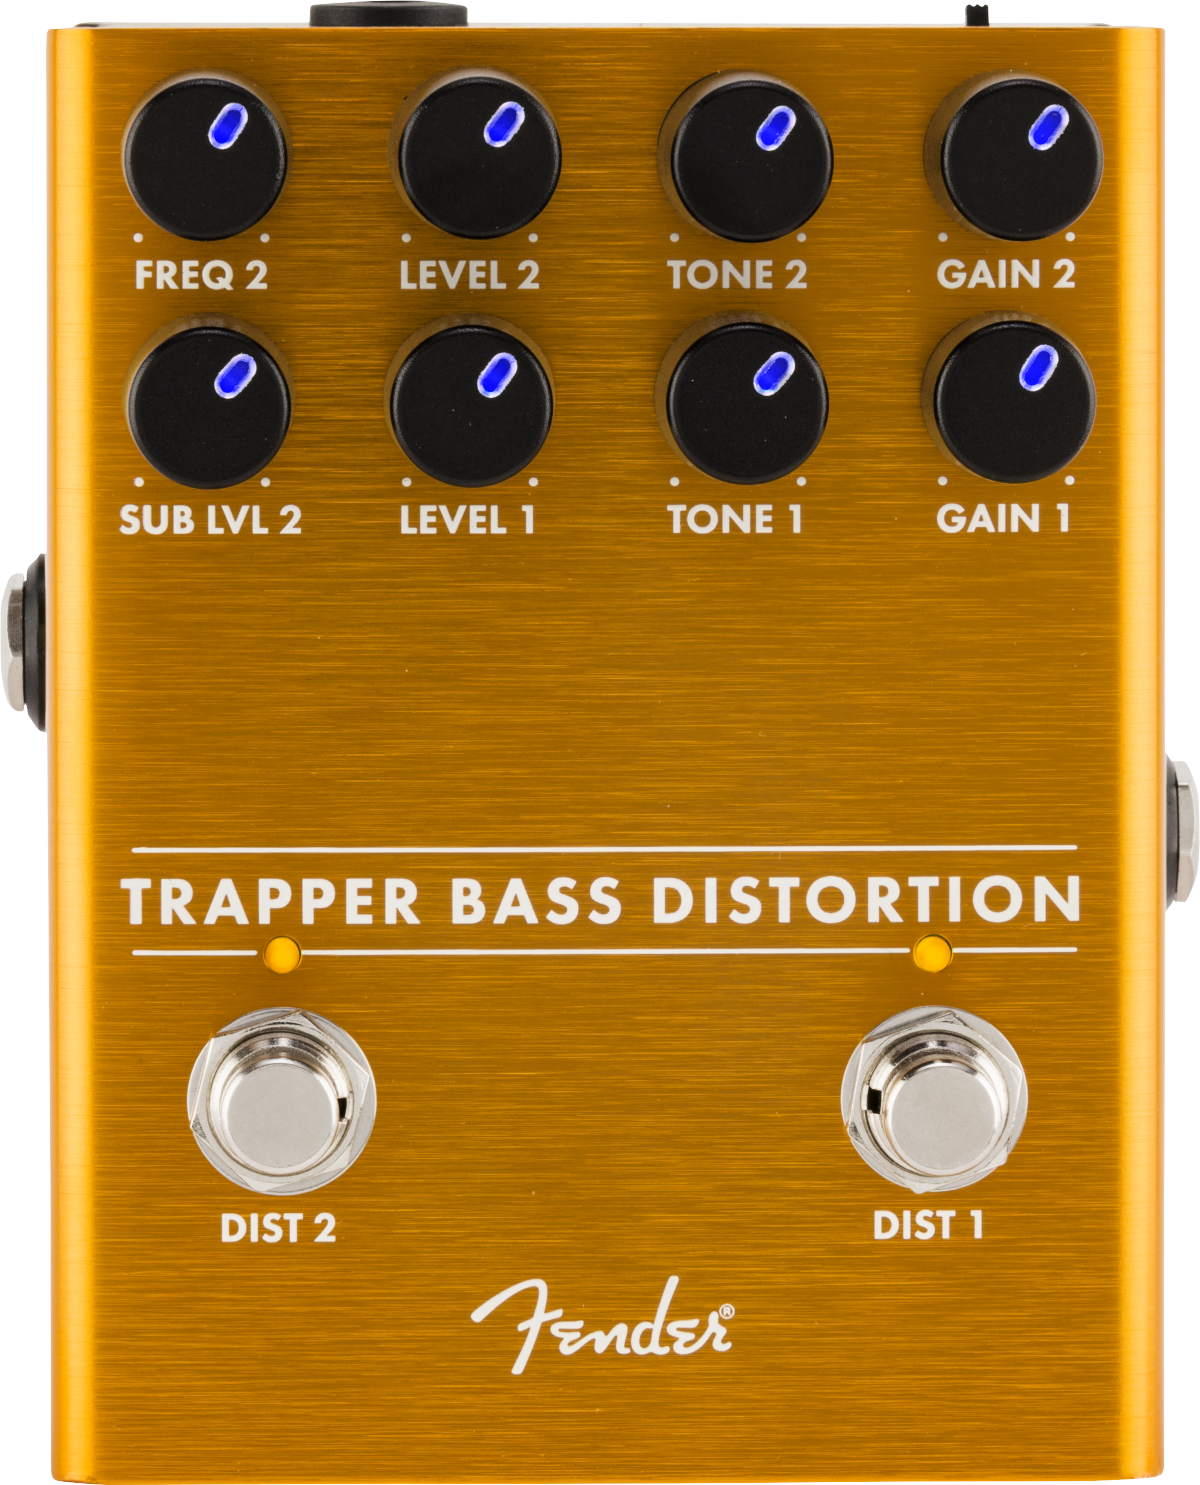 Fender Trapper Bass Distortion - Overdrive, distortion, fuzz effect pedal for bass - Variation 1